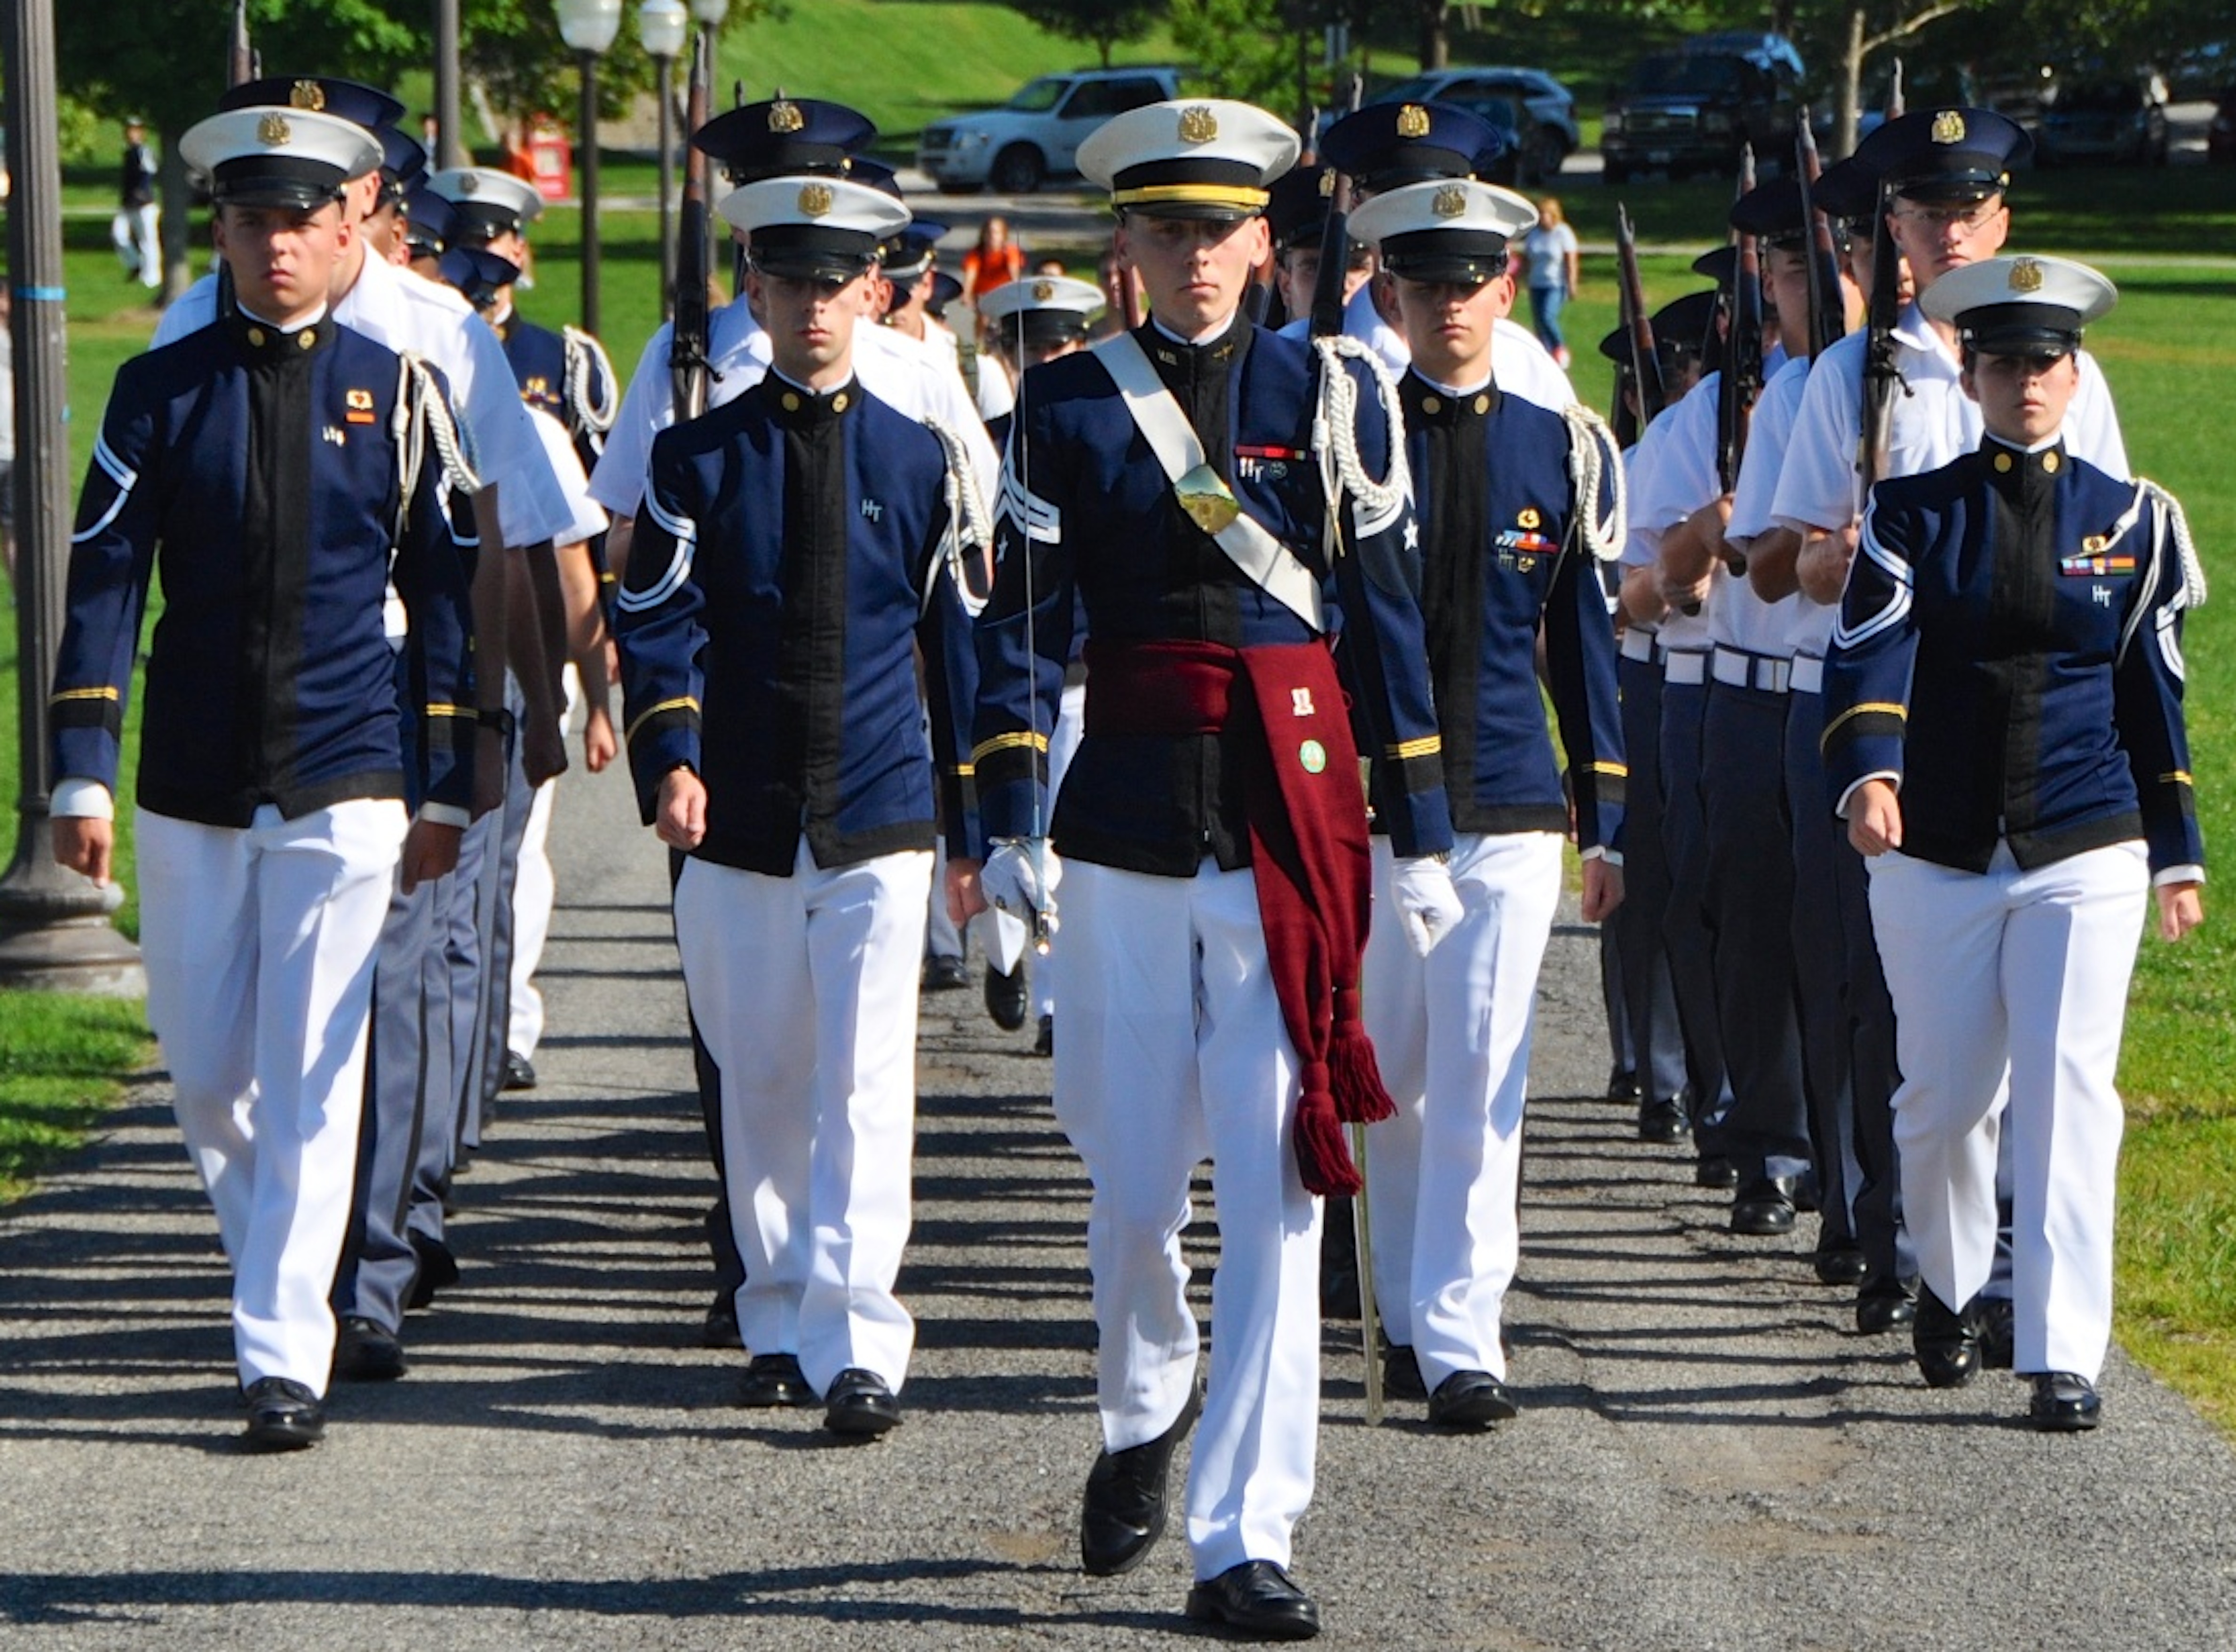 Upperclass cadre lead the newest members of the Corps of Cadets onto the Drillfield for their first parade.